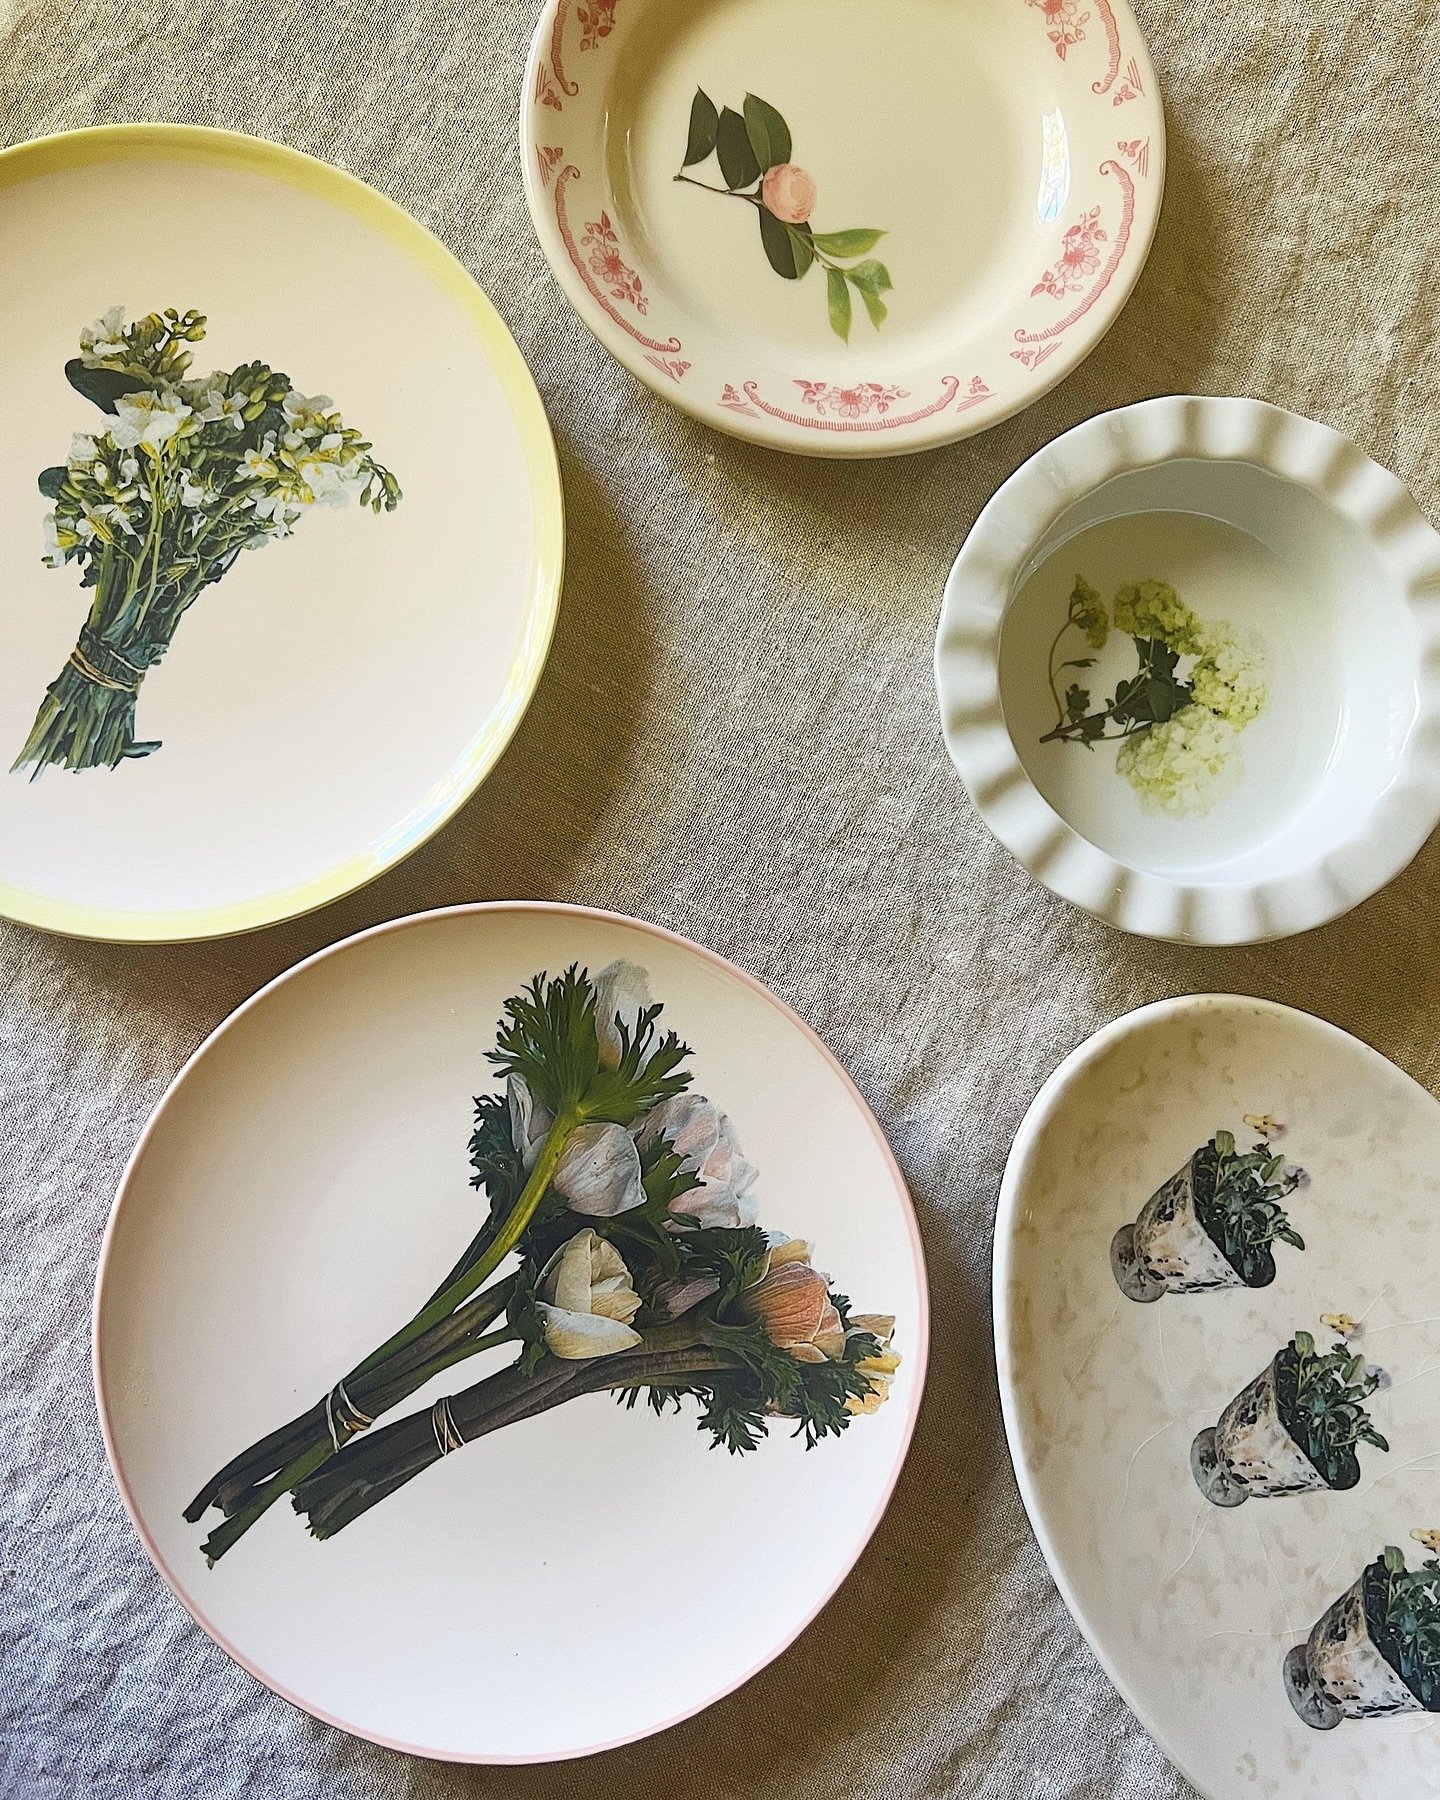 KTH Kitchen Ceramics 

A gather of spring dishes both vintage and new. What will you be setting your table with for Mother&rsquo;s Day? Love a mixed table with lots of sentimental things. Like flowers that remind you of mom or past moms, special dish